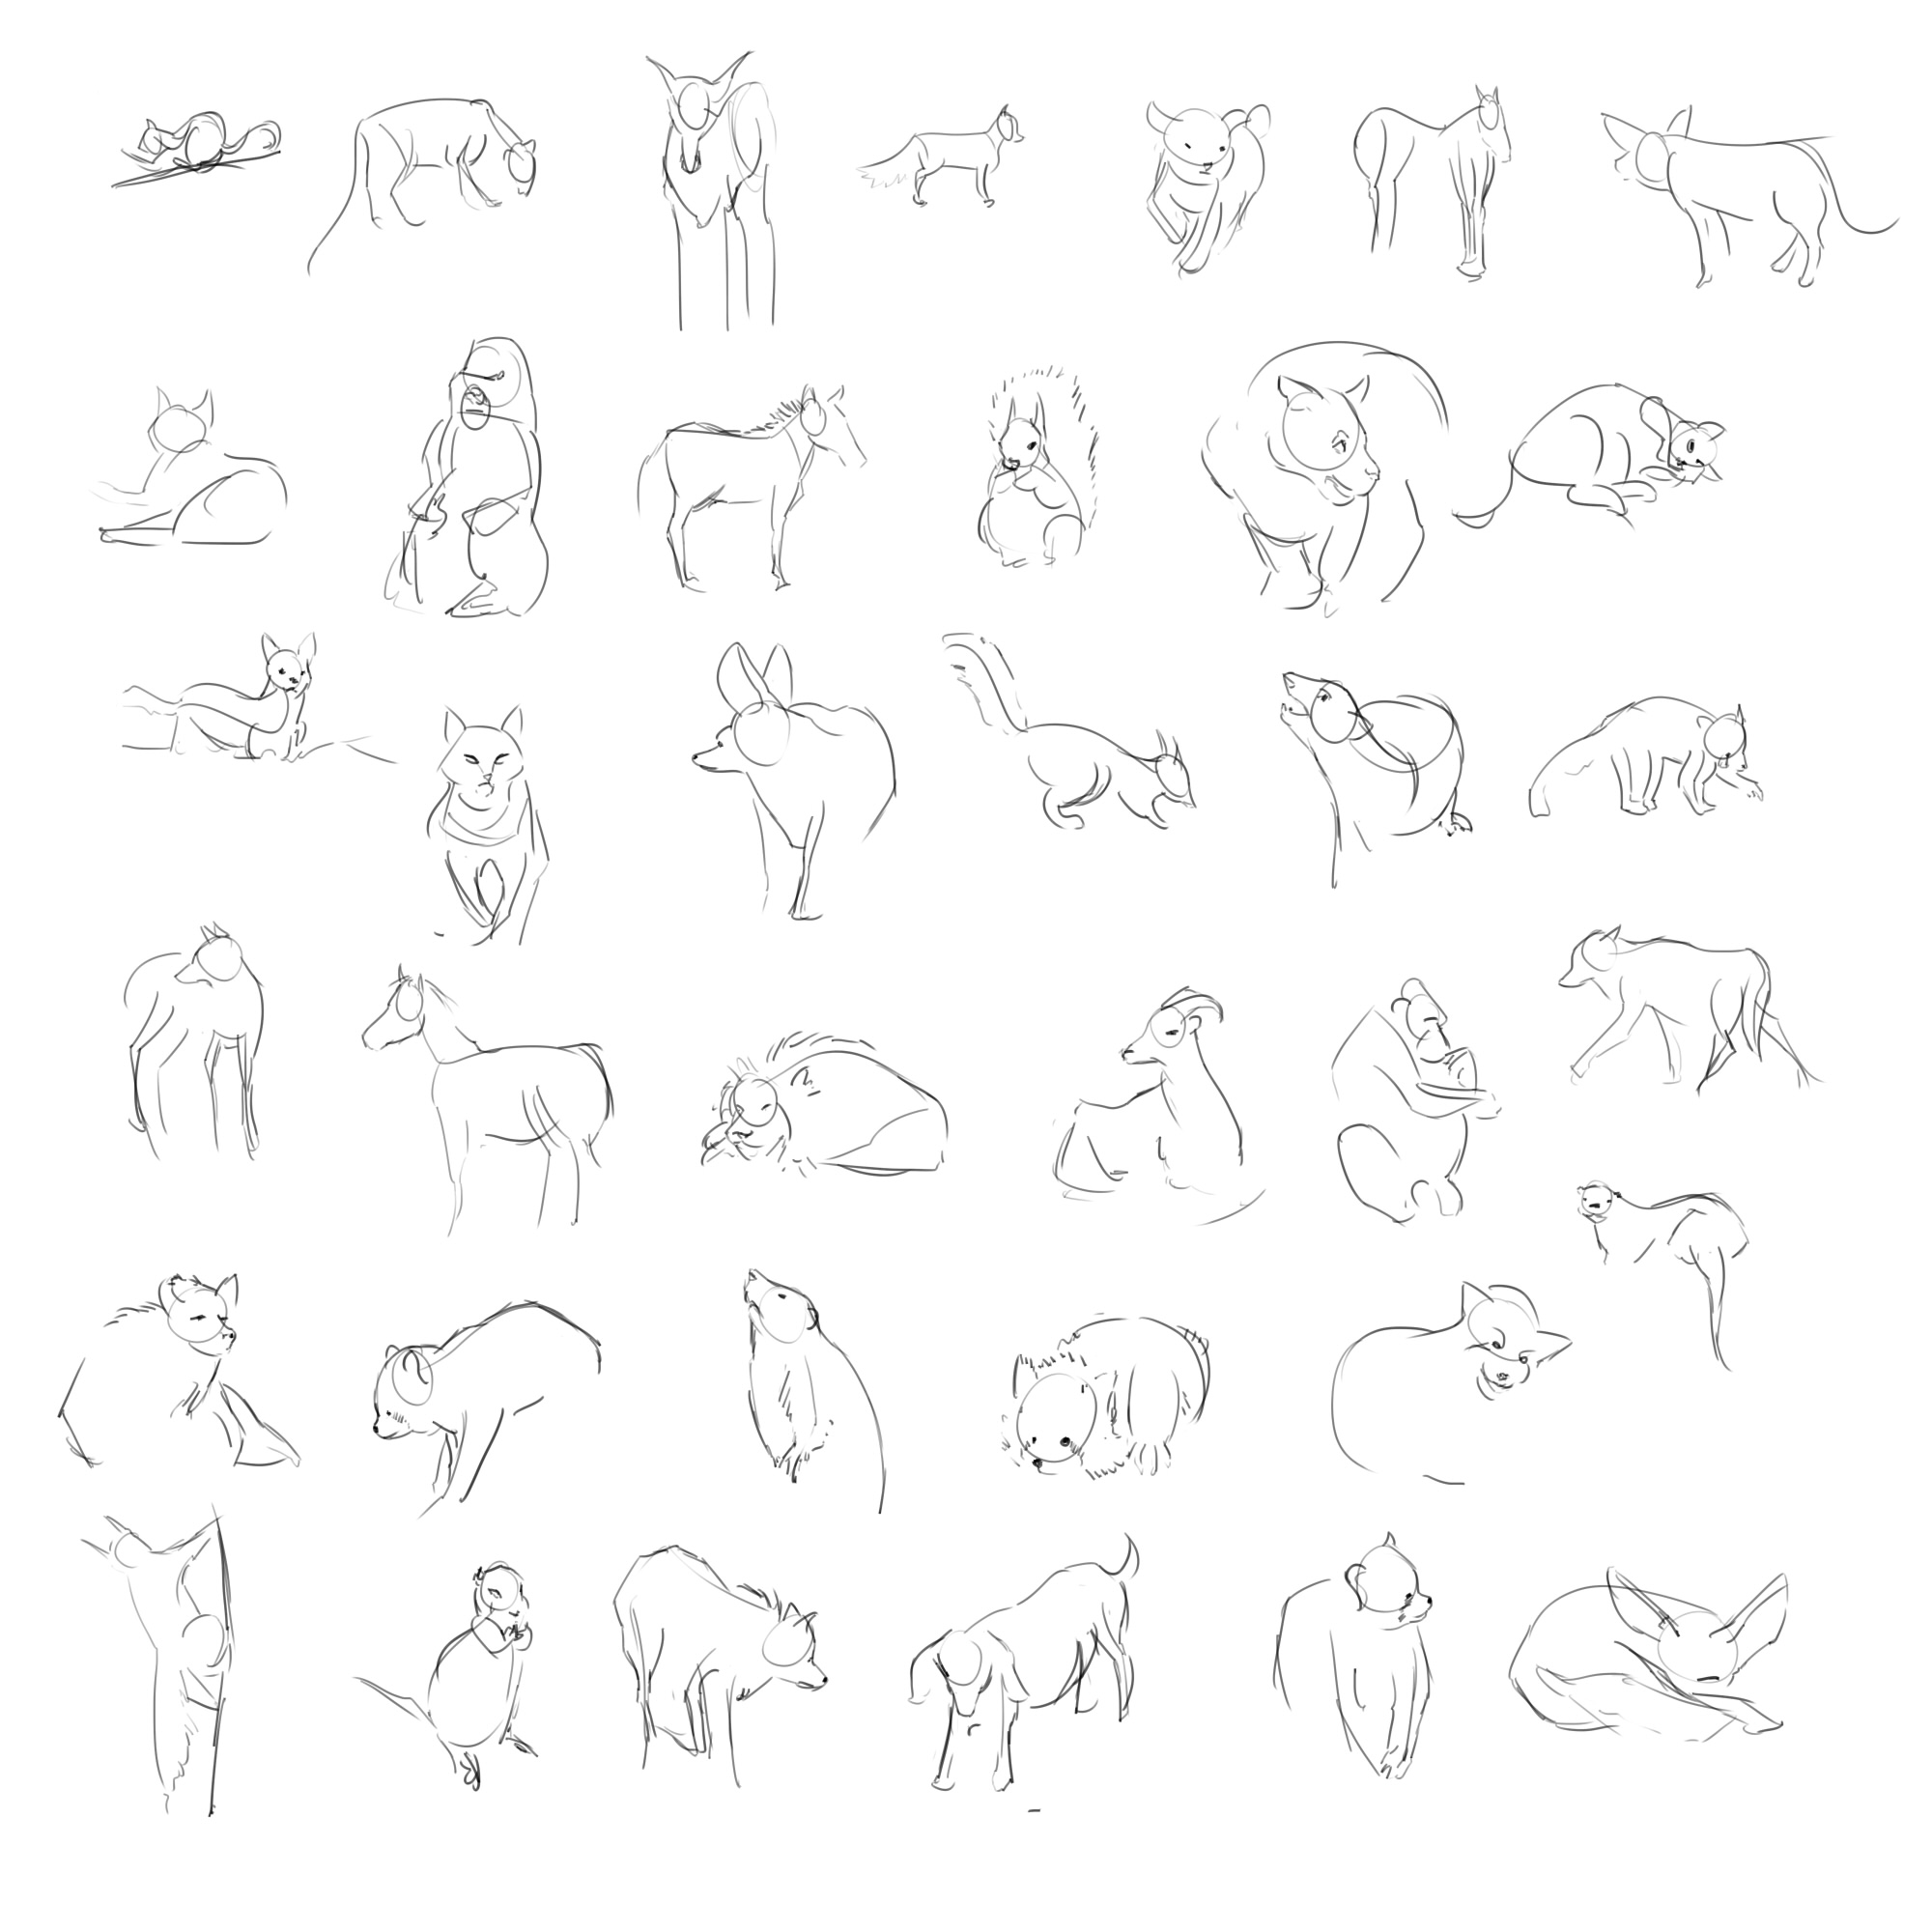 Animal Gesture Drawing by Pear-tree on DeviantArt